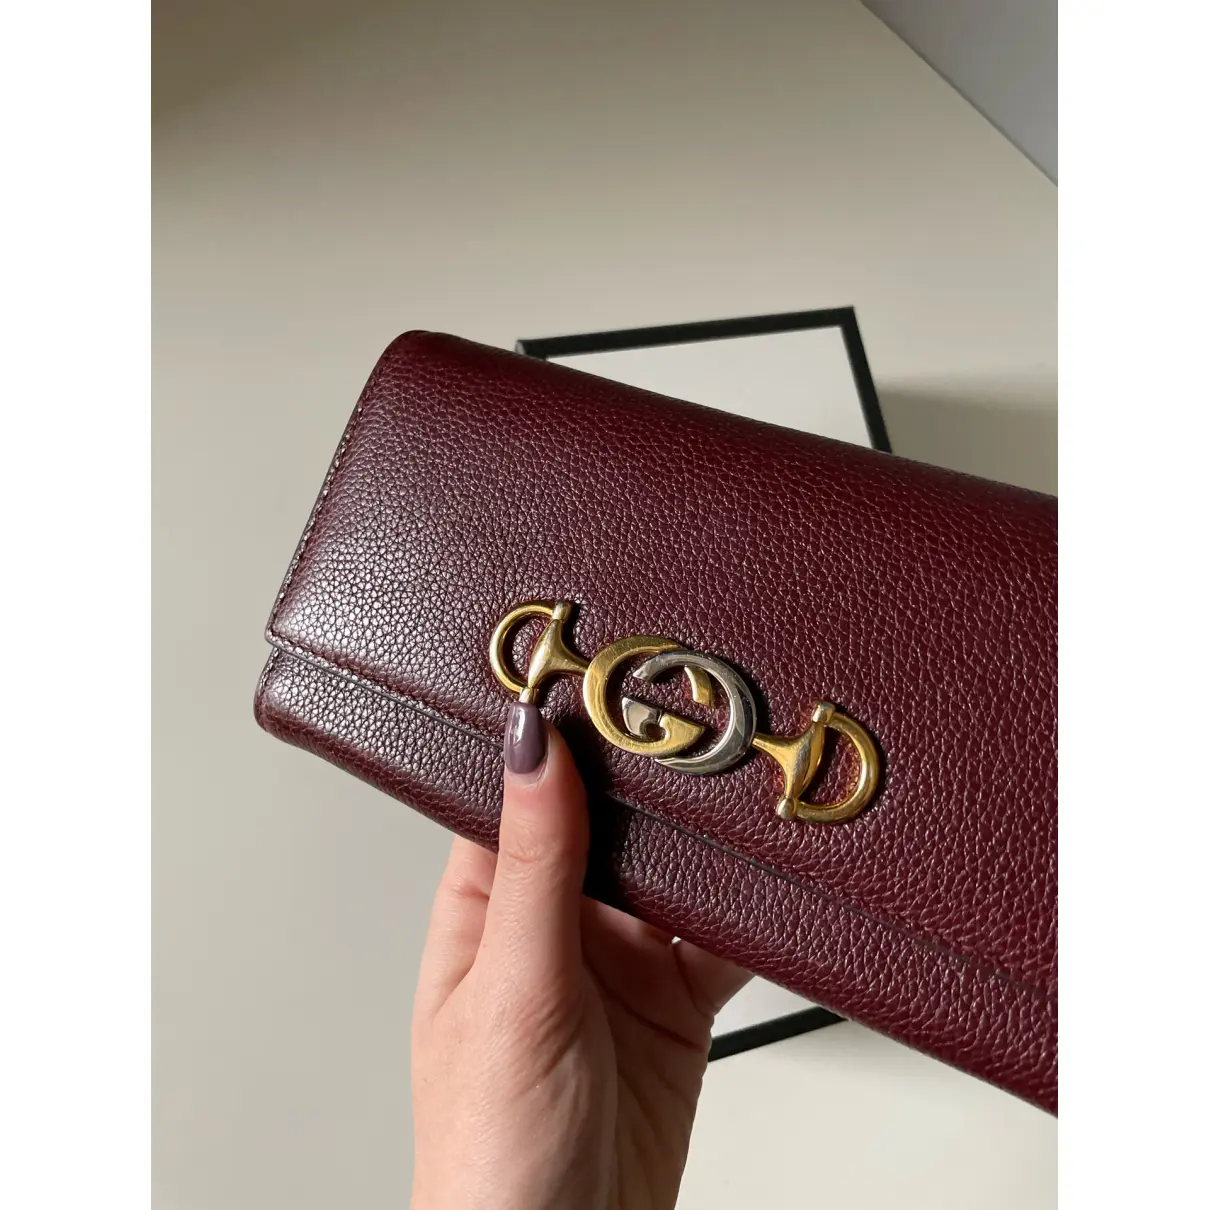 Buy Gucci Zumi leather wallet online